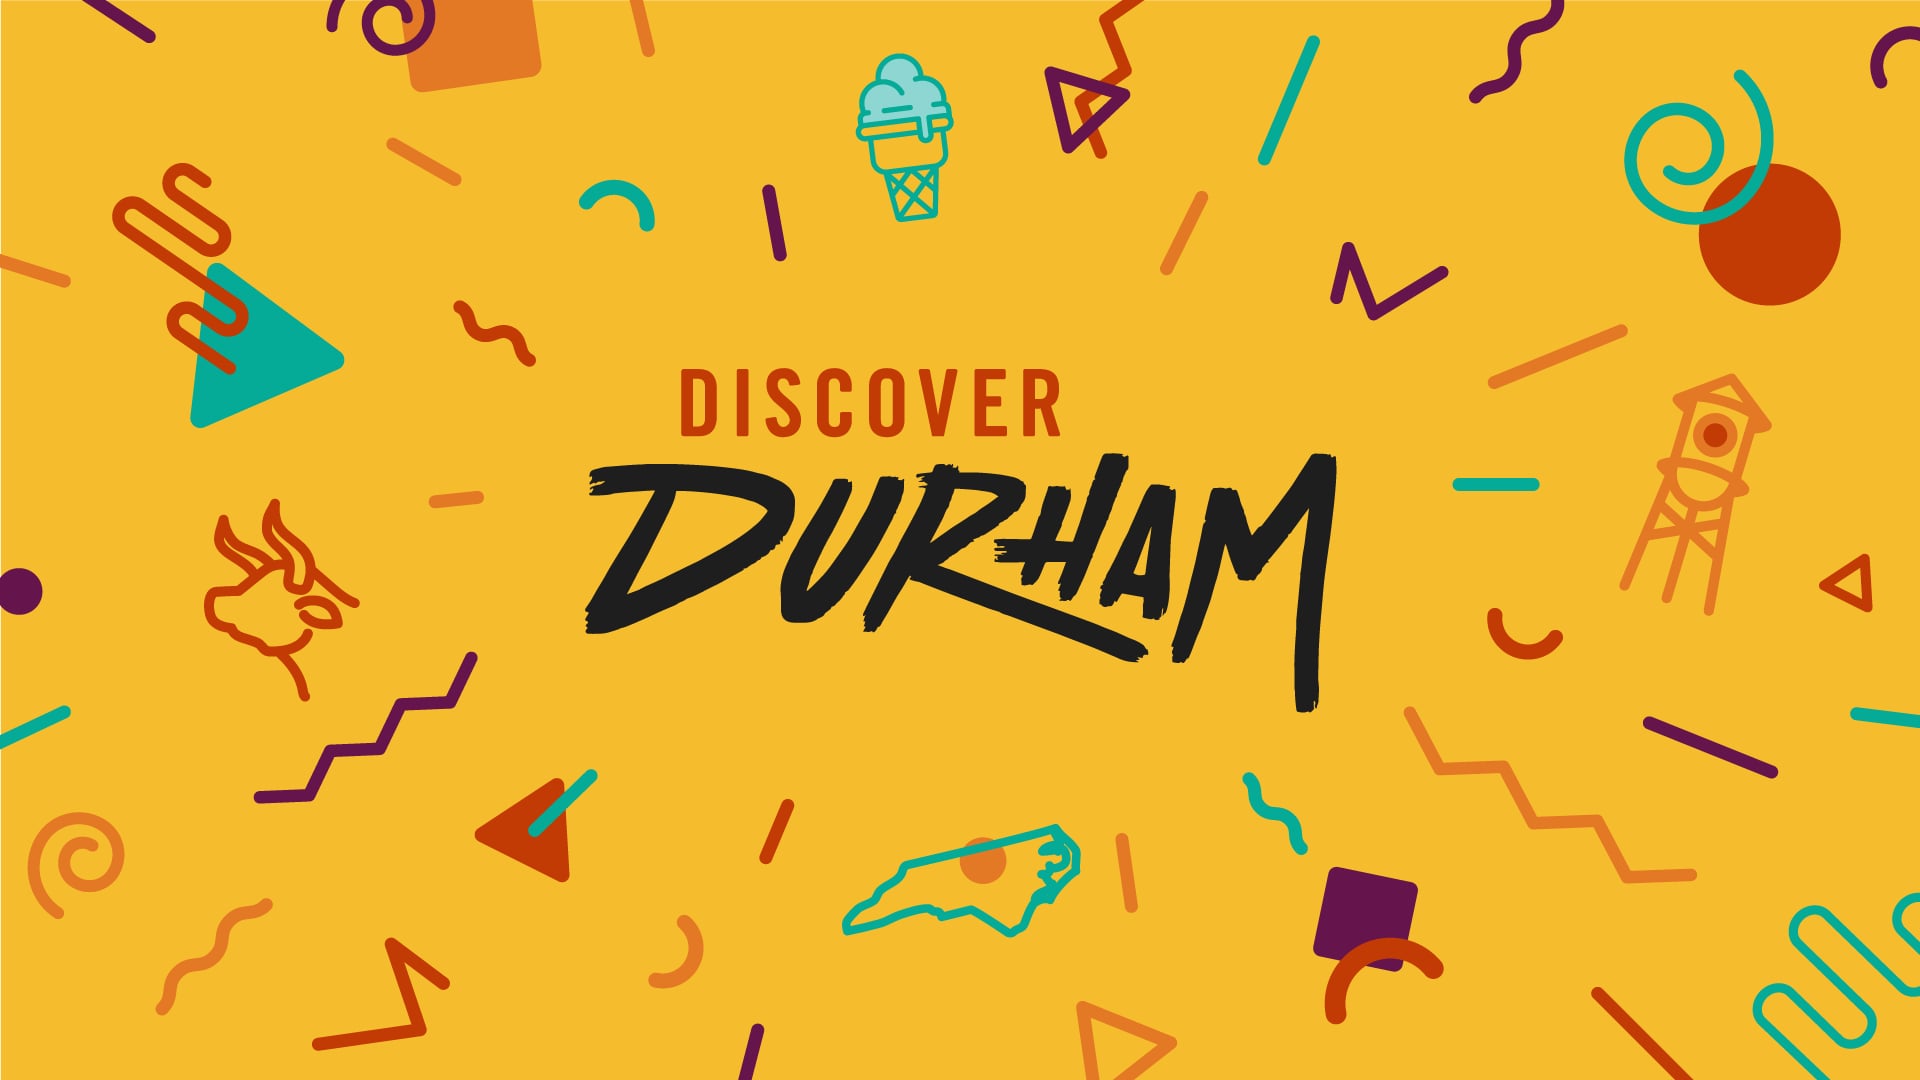 Discover Durham - Fall 2019 Ad Campaign